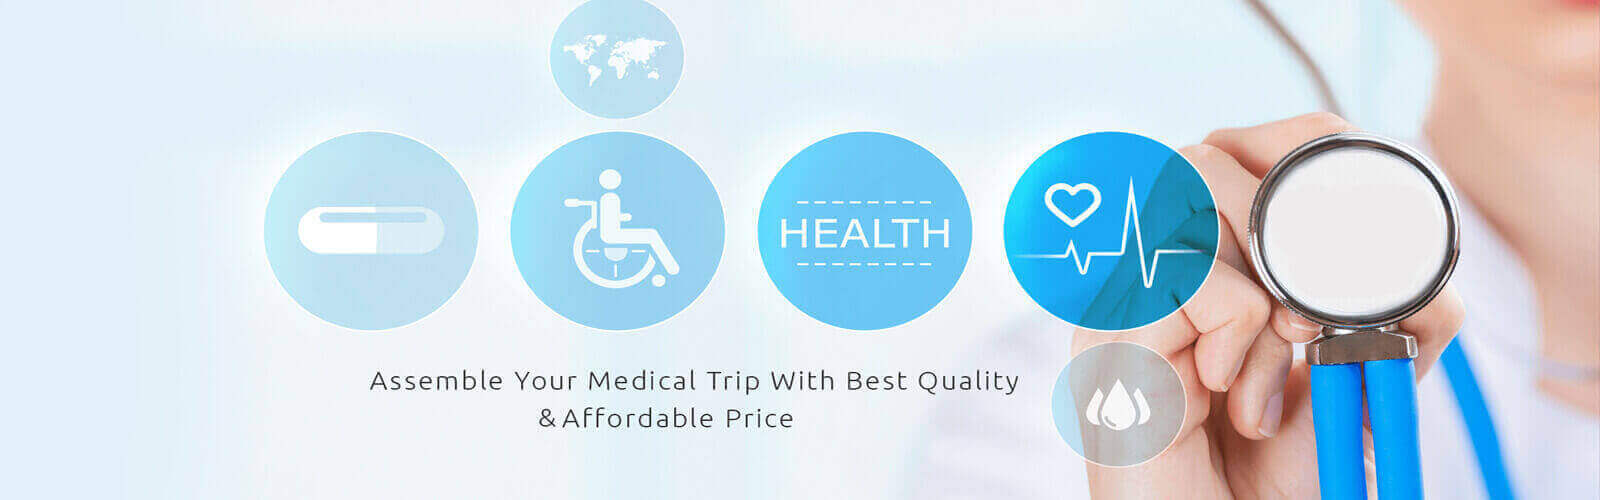 Are You Seeking For Affordable Medical Treatment? We Are Happy To Help You